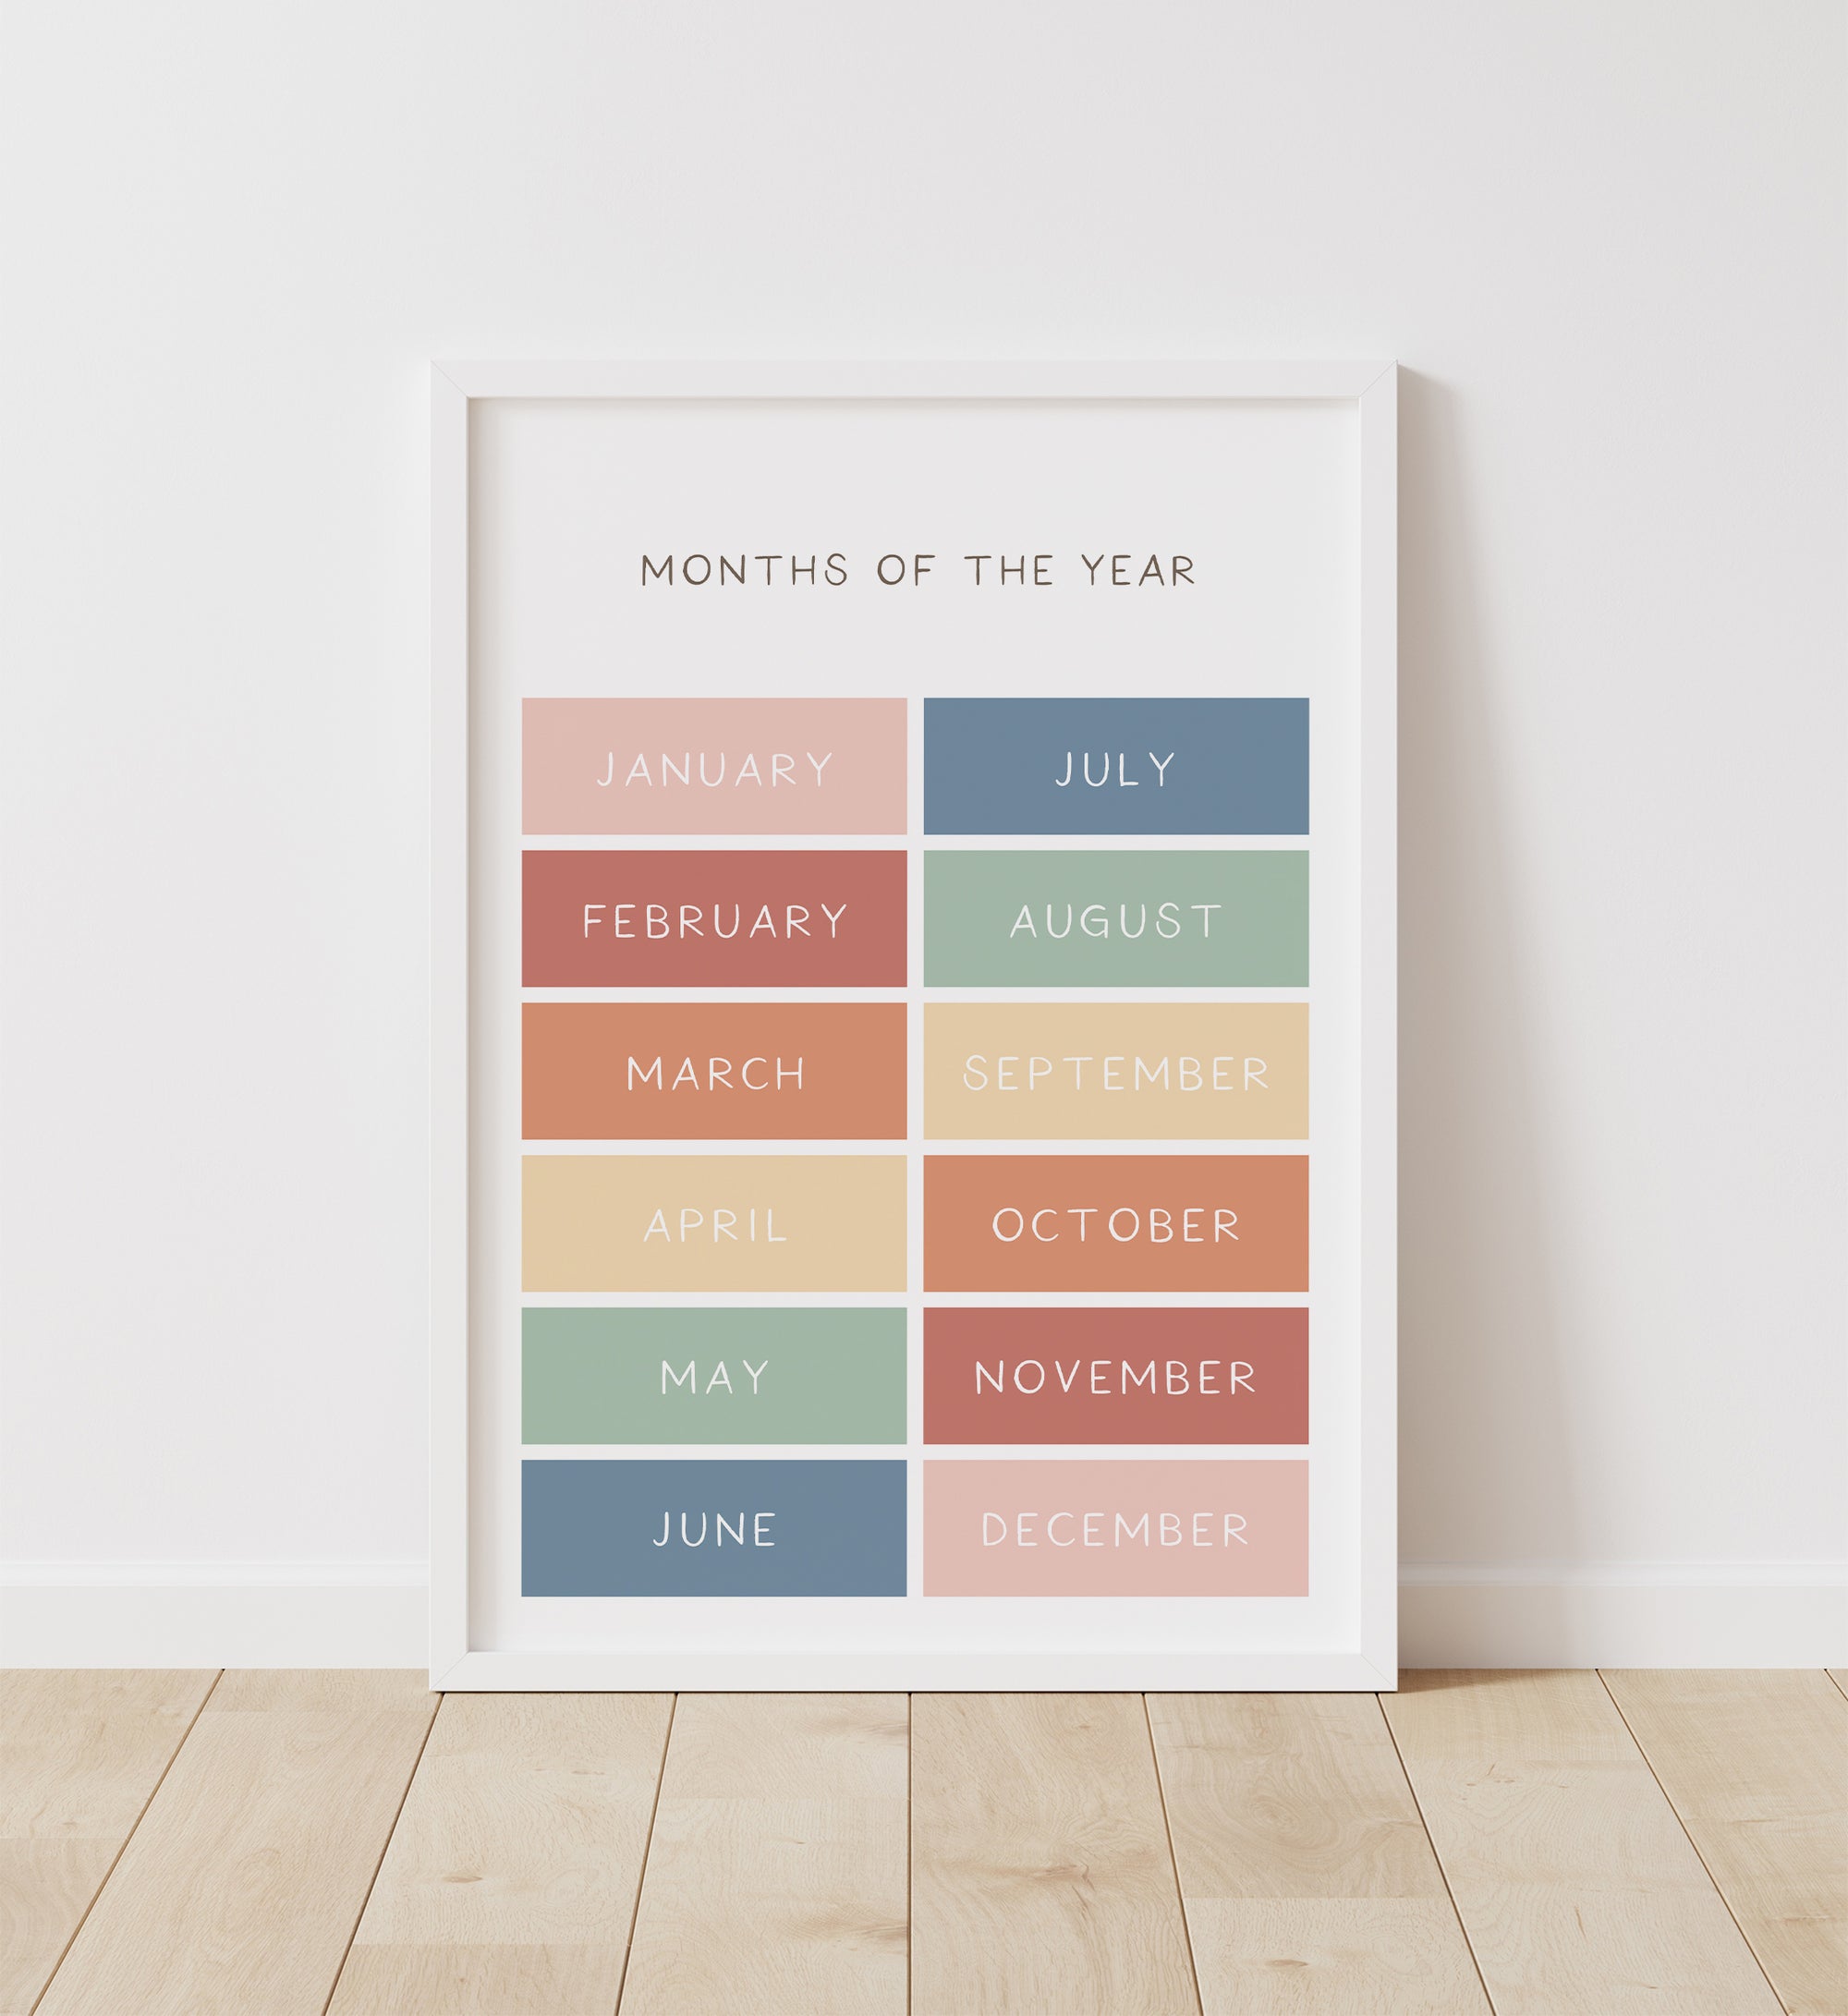 Months of the Year Print - MRCP